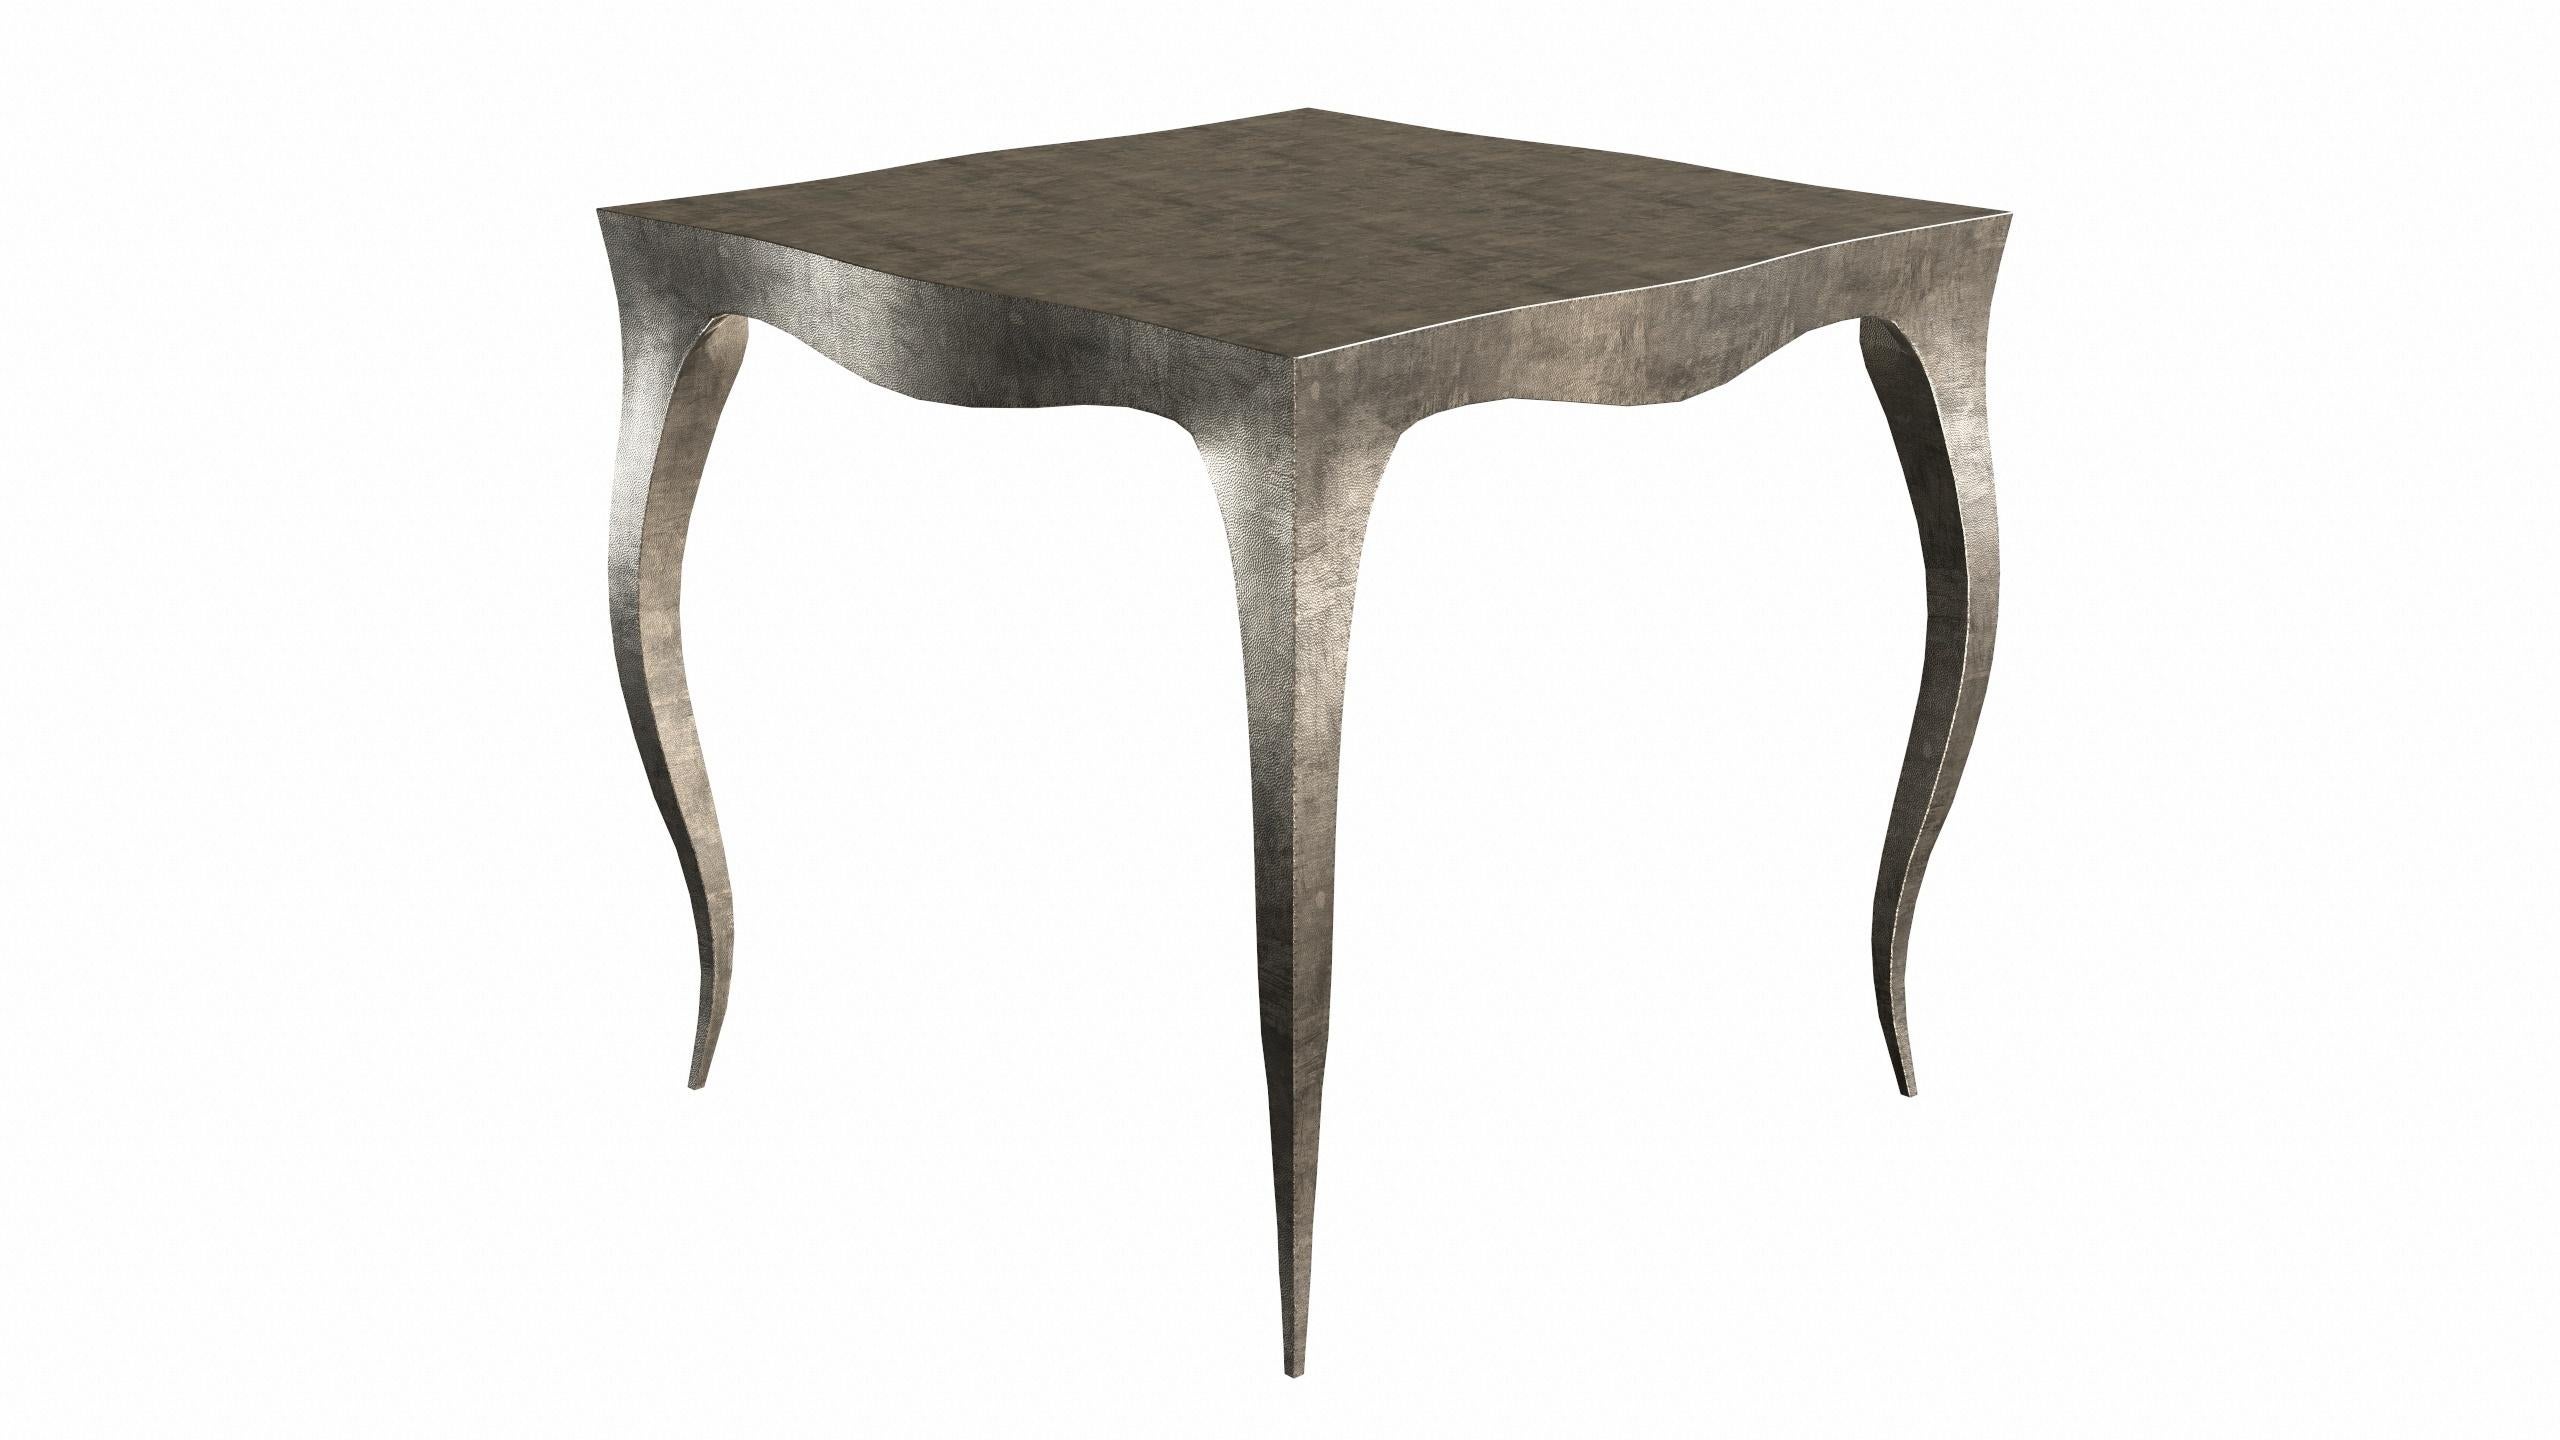 Metal Louise Art Deco Center Tables Mid. Hammered Antique Bronze by Paul Mathieu For Sale